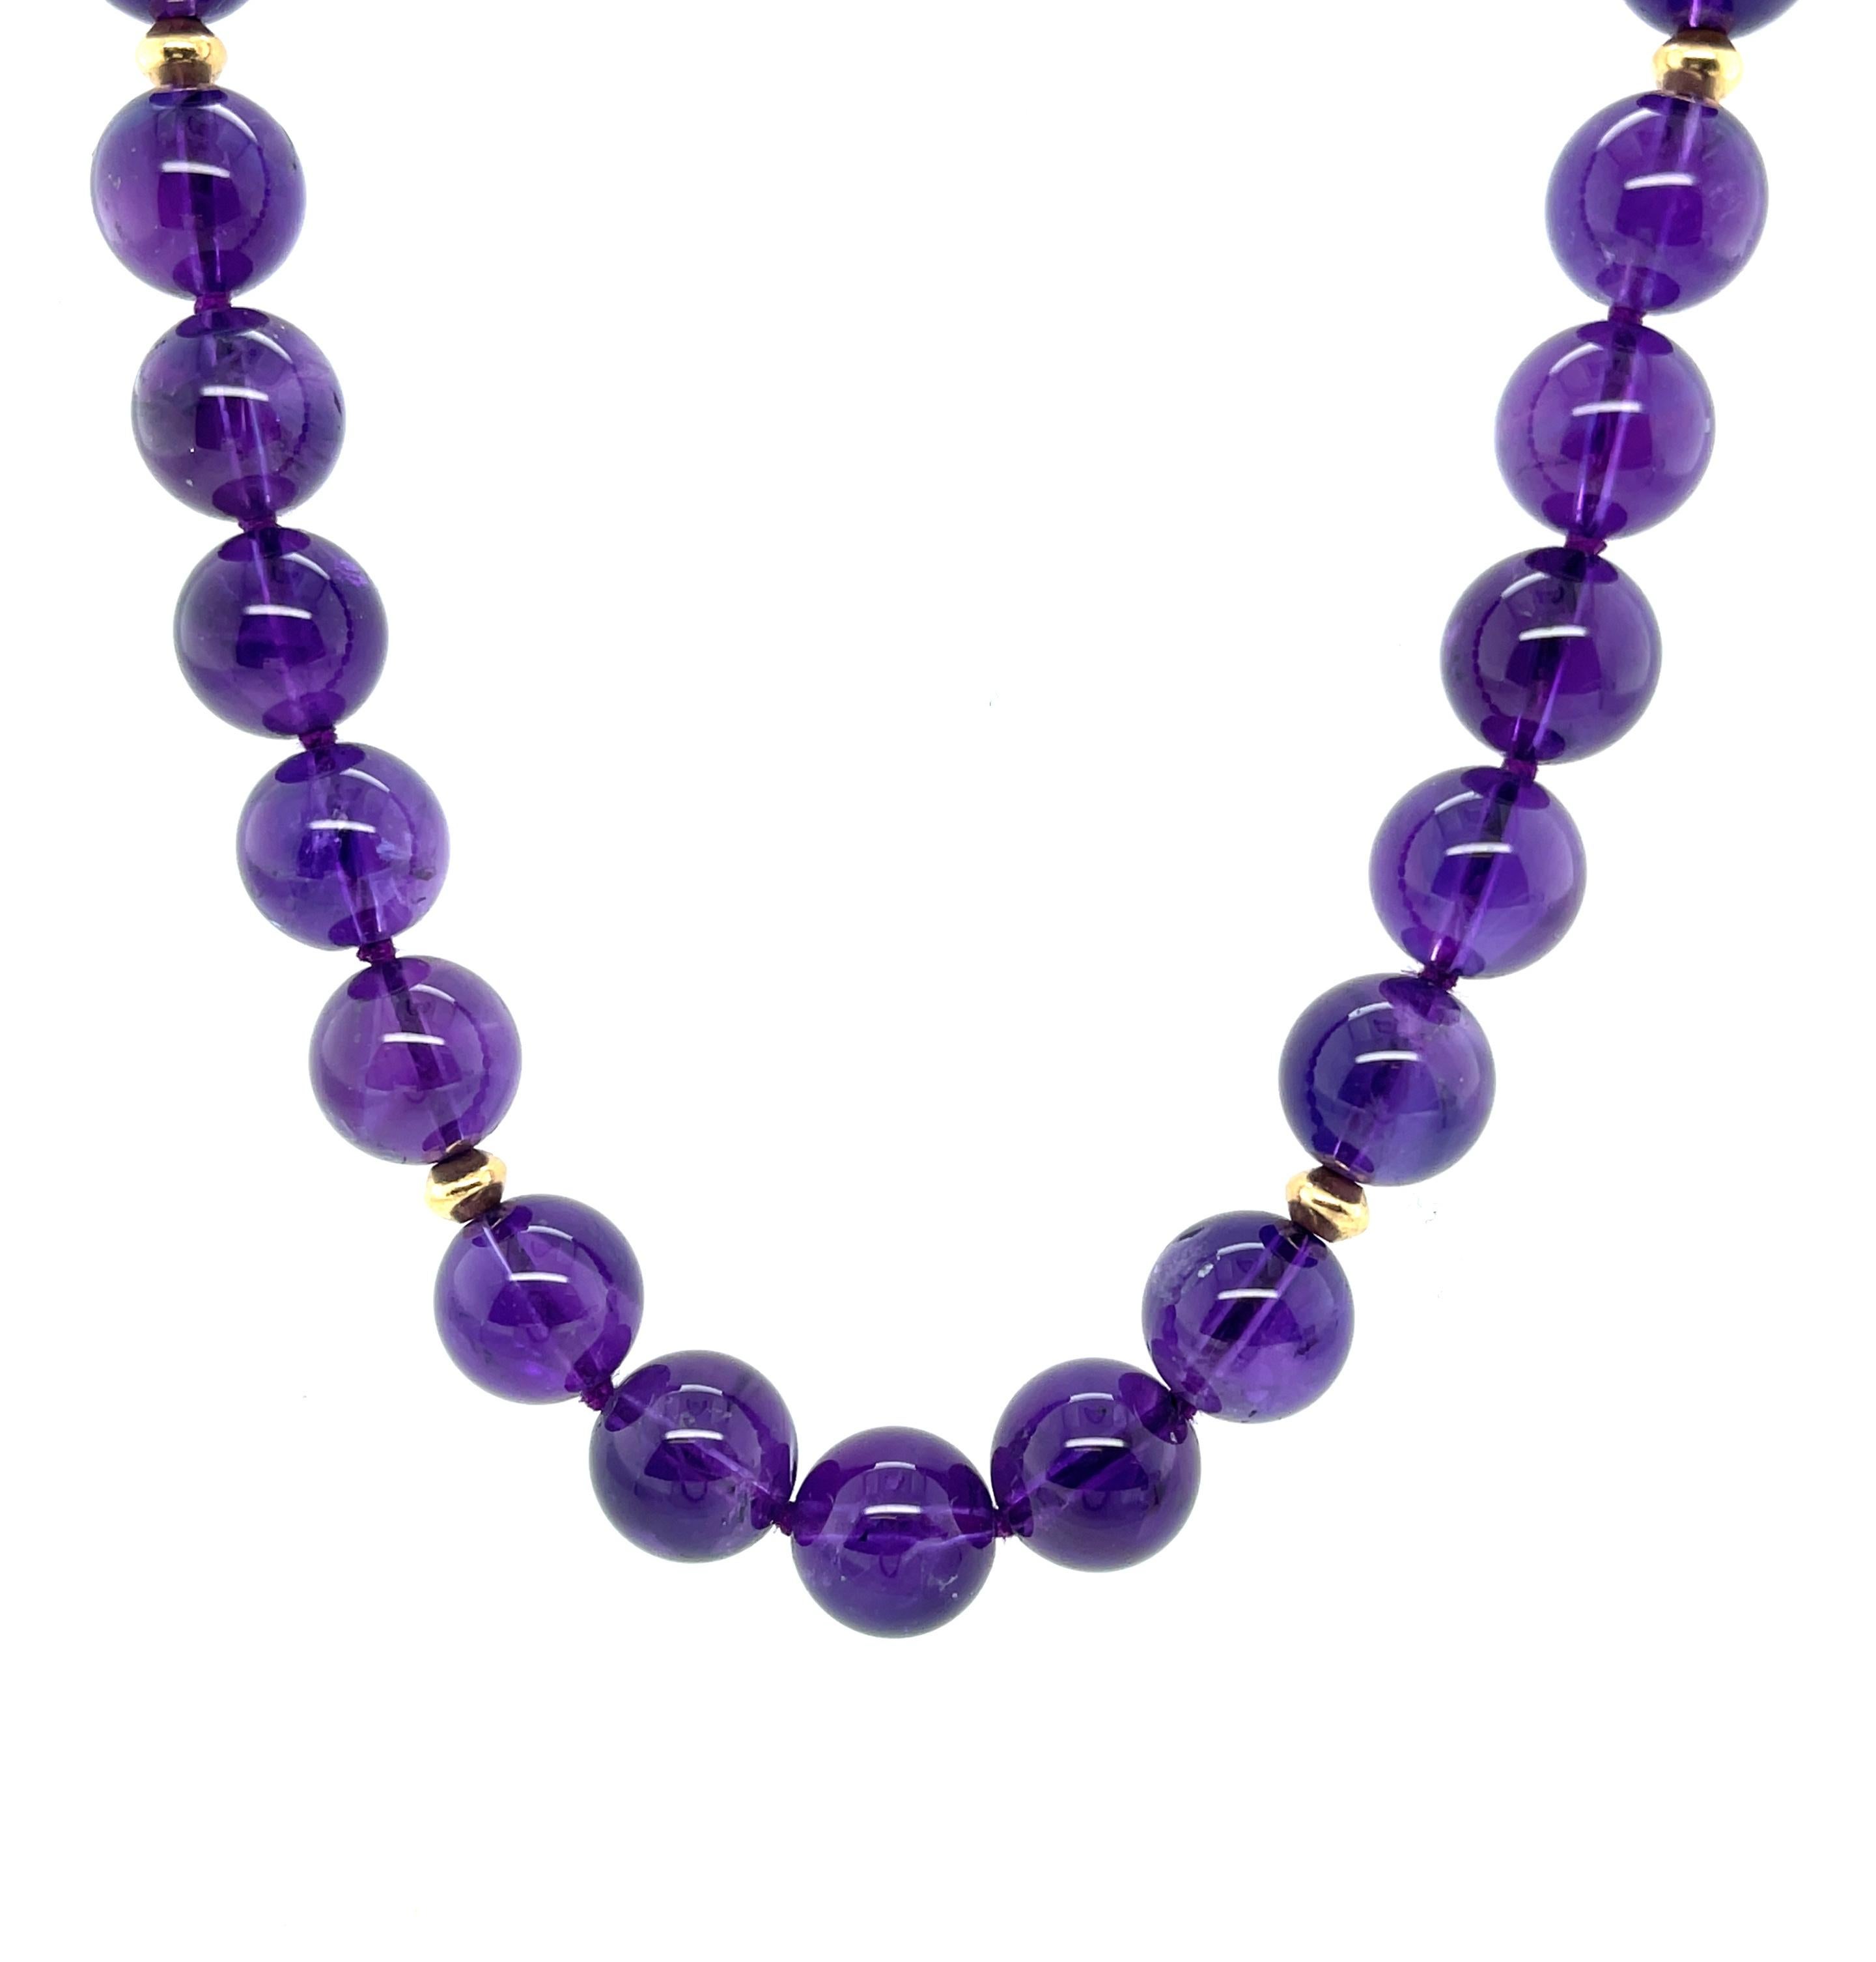 This fine quality amethyst necklace features beautifully matched amethyst beads with gorgeous, even purple color. The 10mm beads have been arranged with bright, 18k yellow gold spacers, elevating this necklace to 